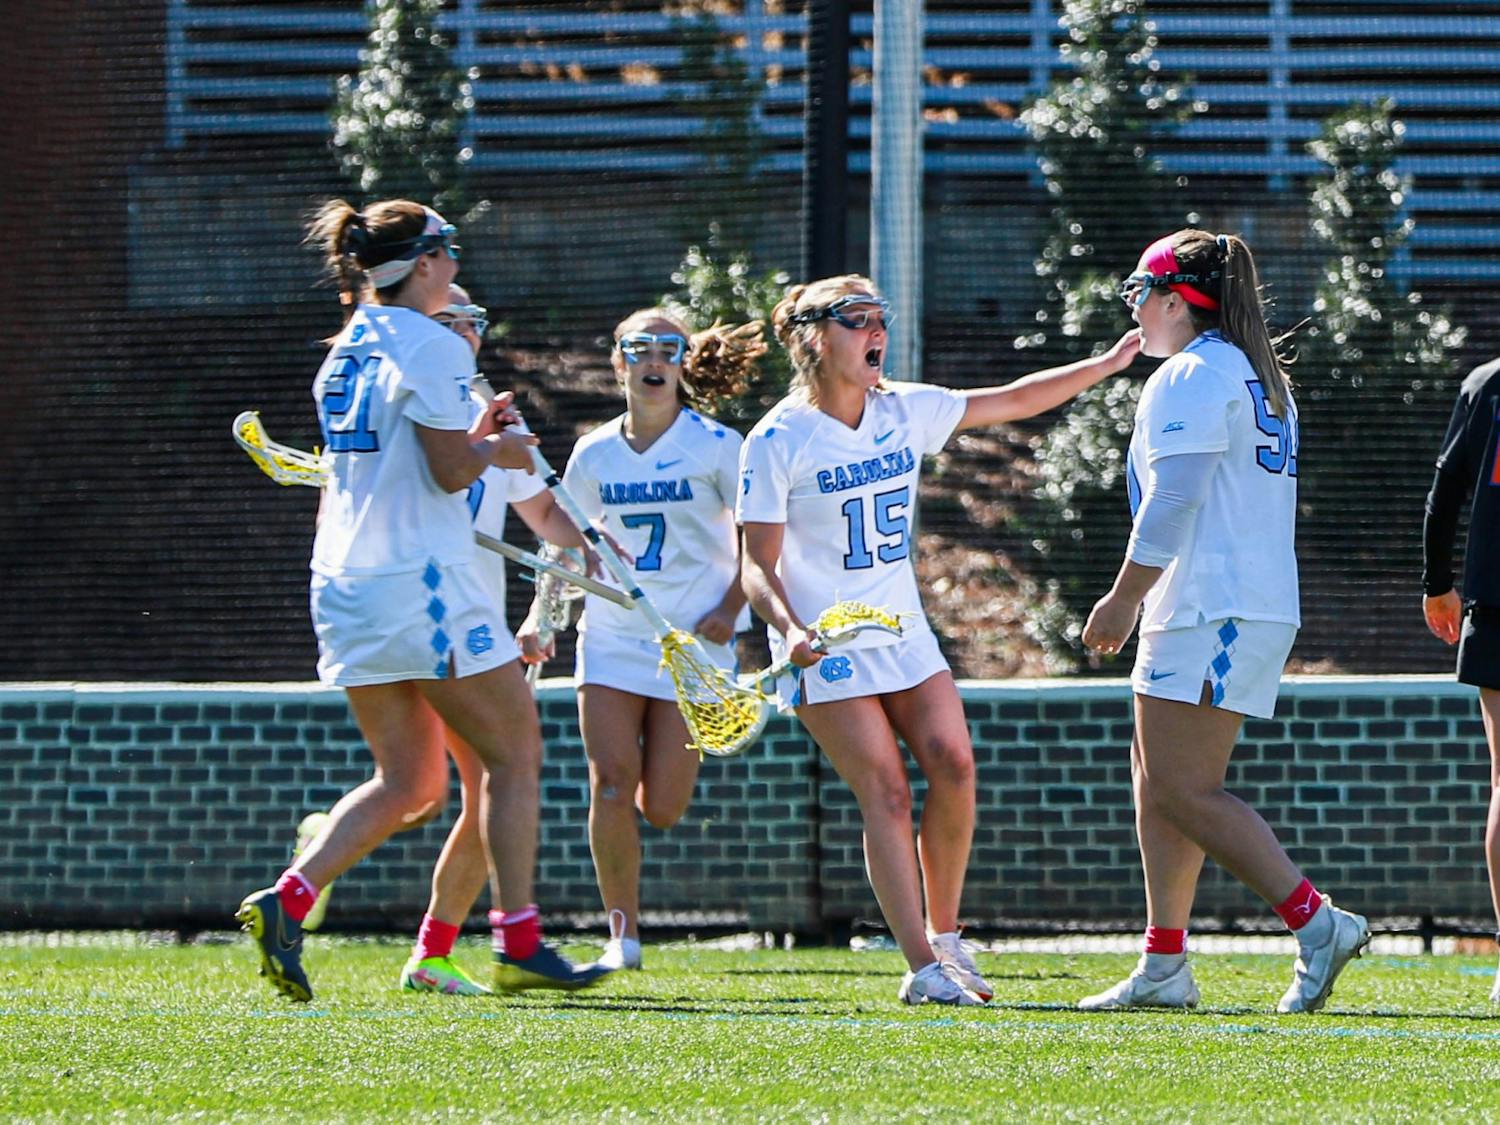 The UNC women’s lacrosse team celebrates after scoring a goal during the game against UF on Saturday, Feb. 18, 2023, at Dorrance Field. UNC beat UF 12-5.